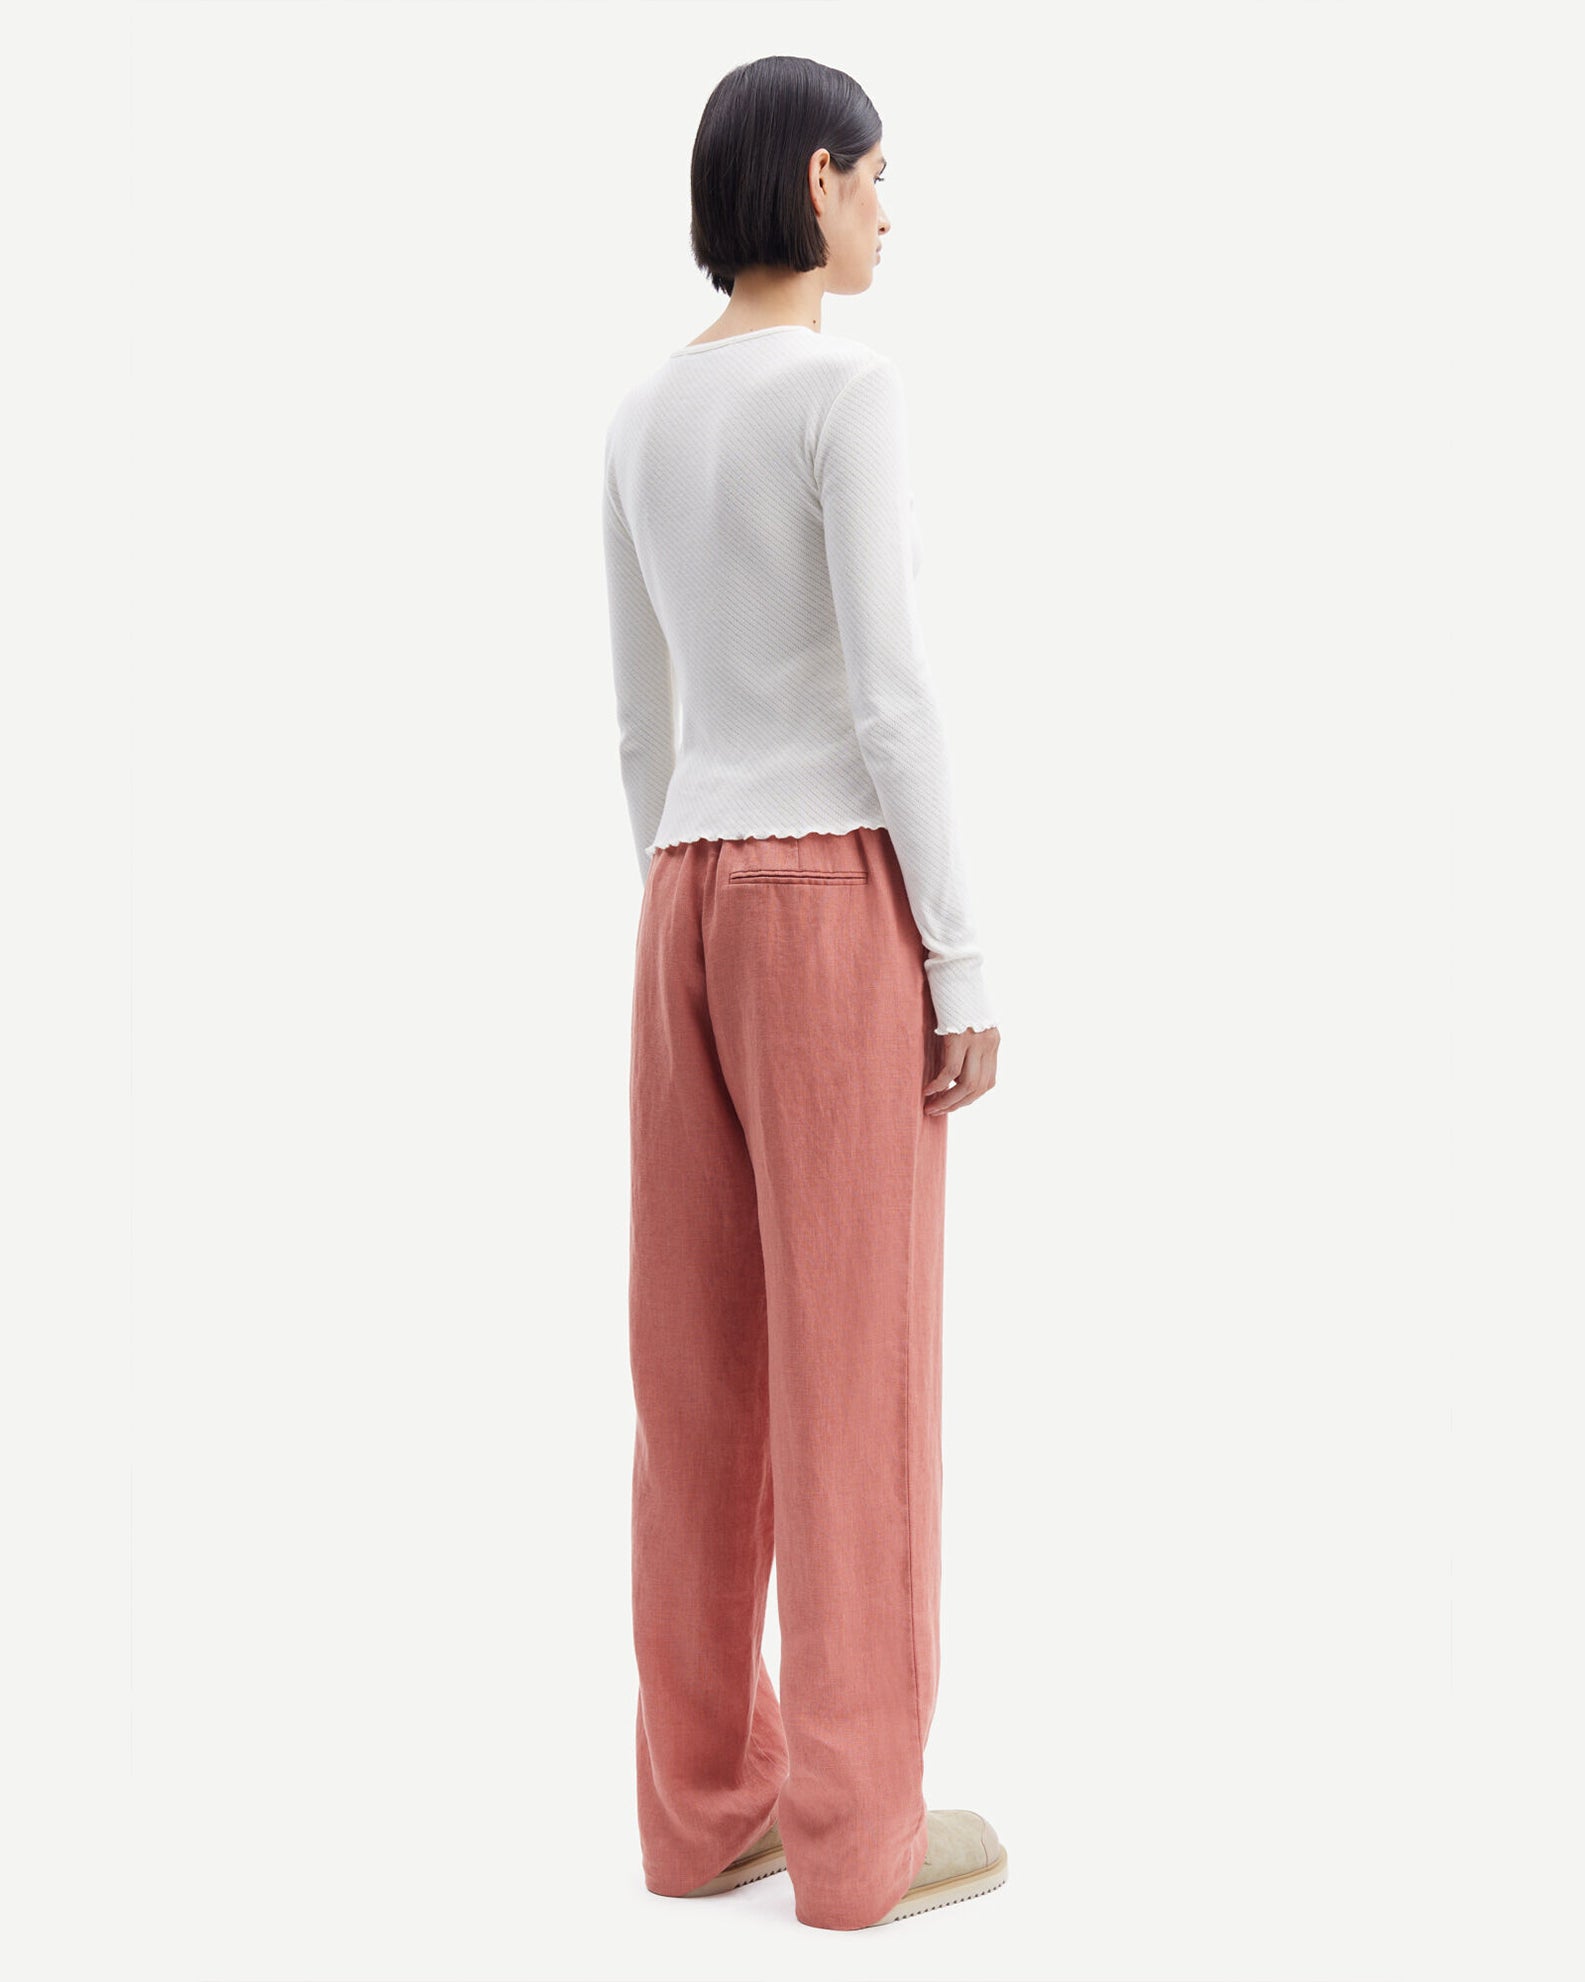 Hoys Straight Trousers 14329 - Canyon Rose